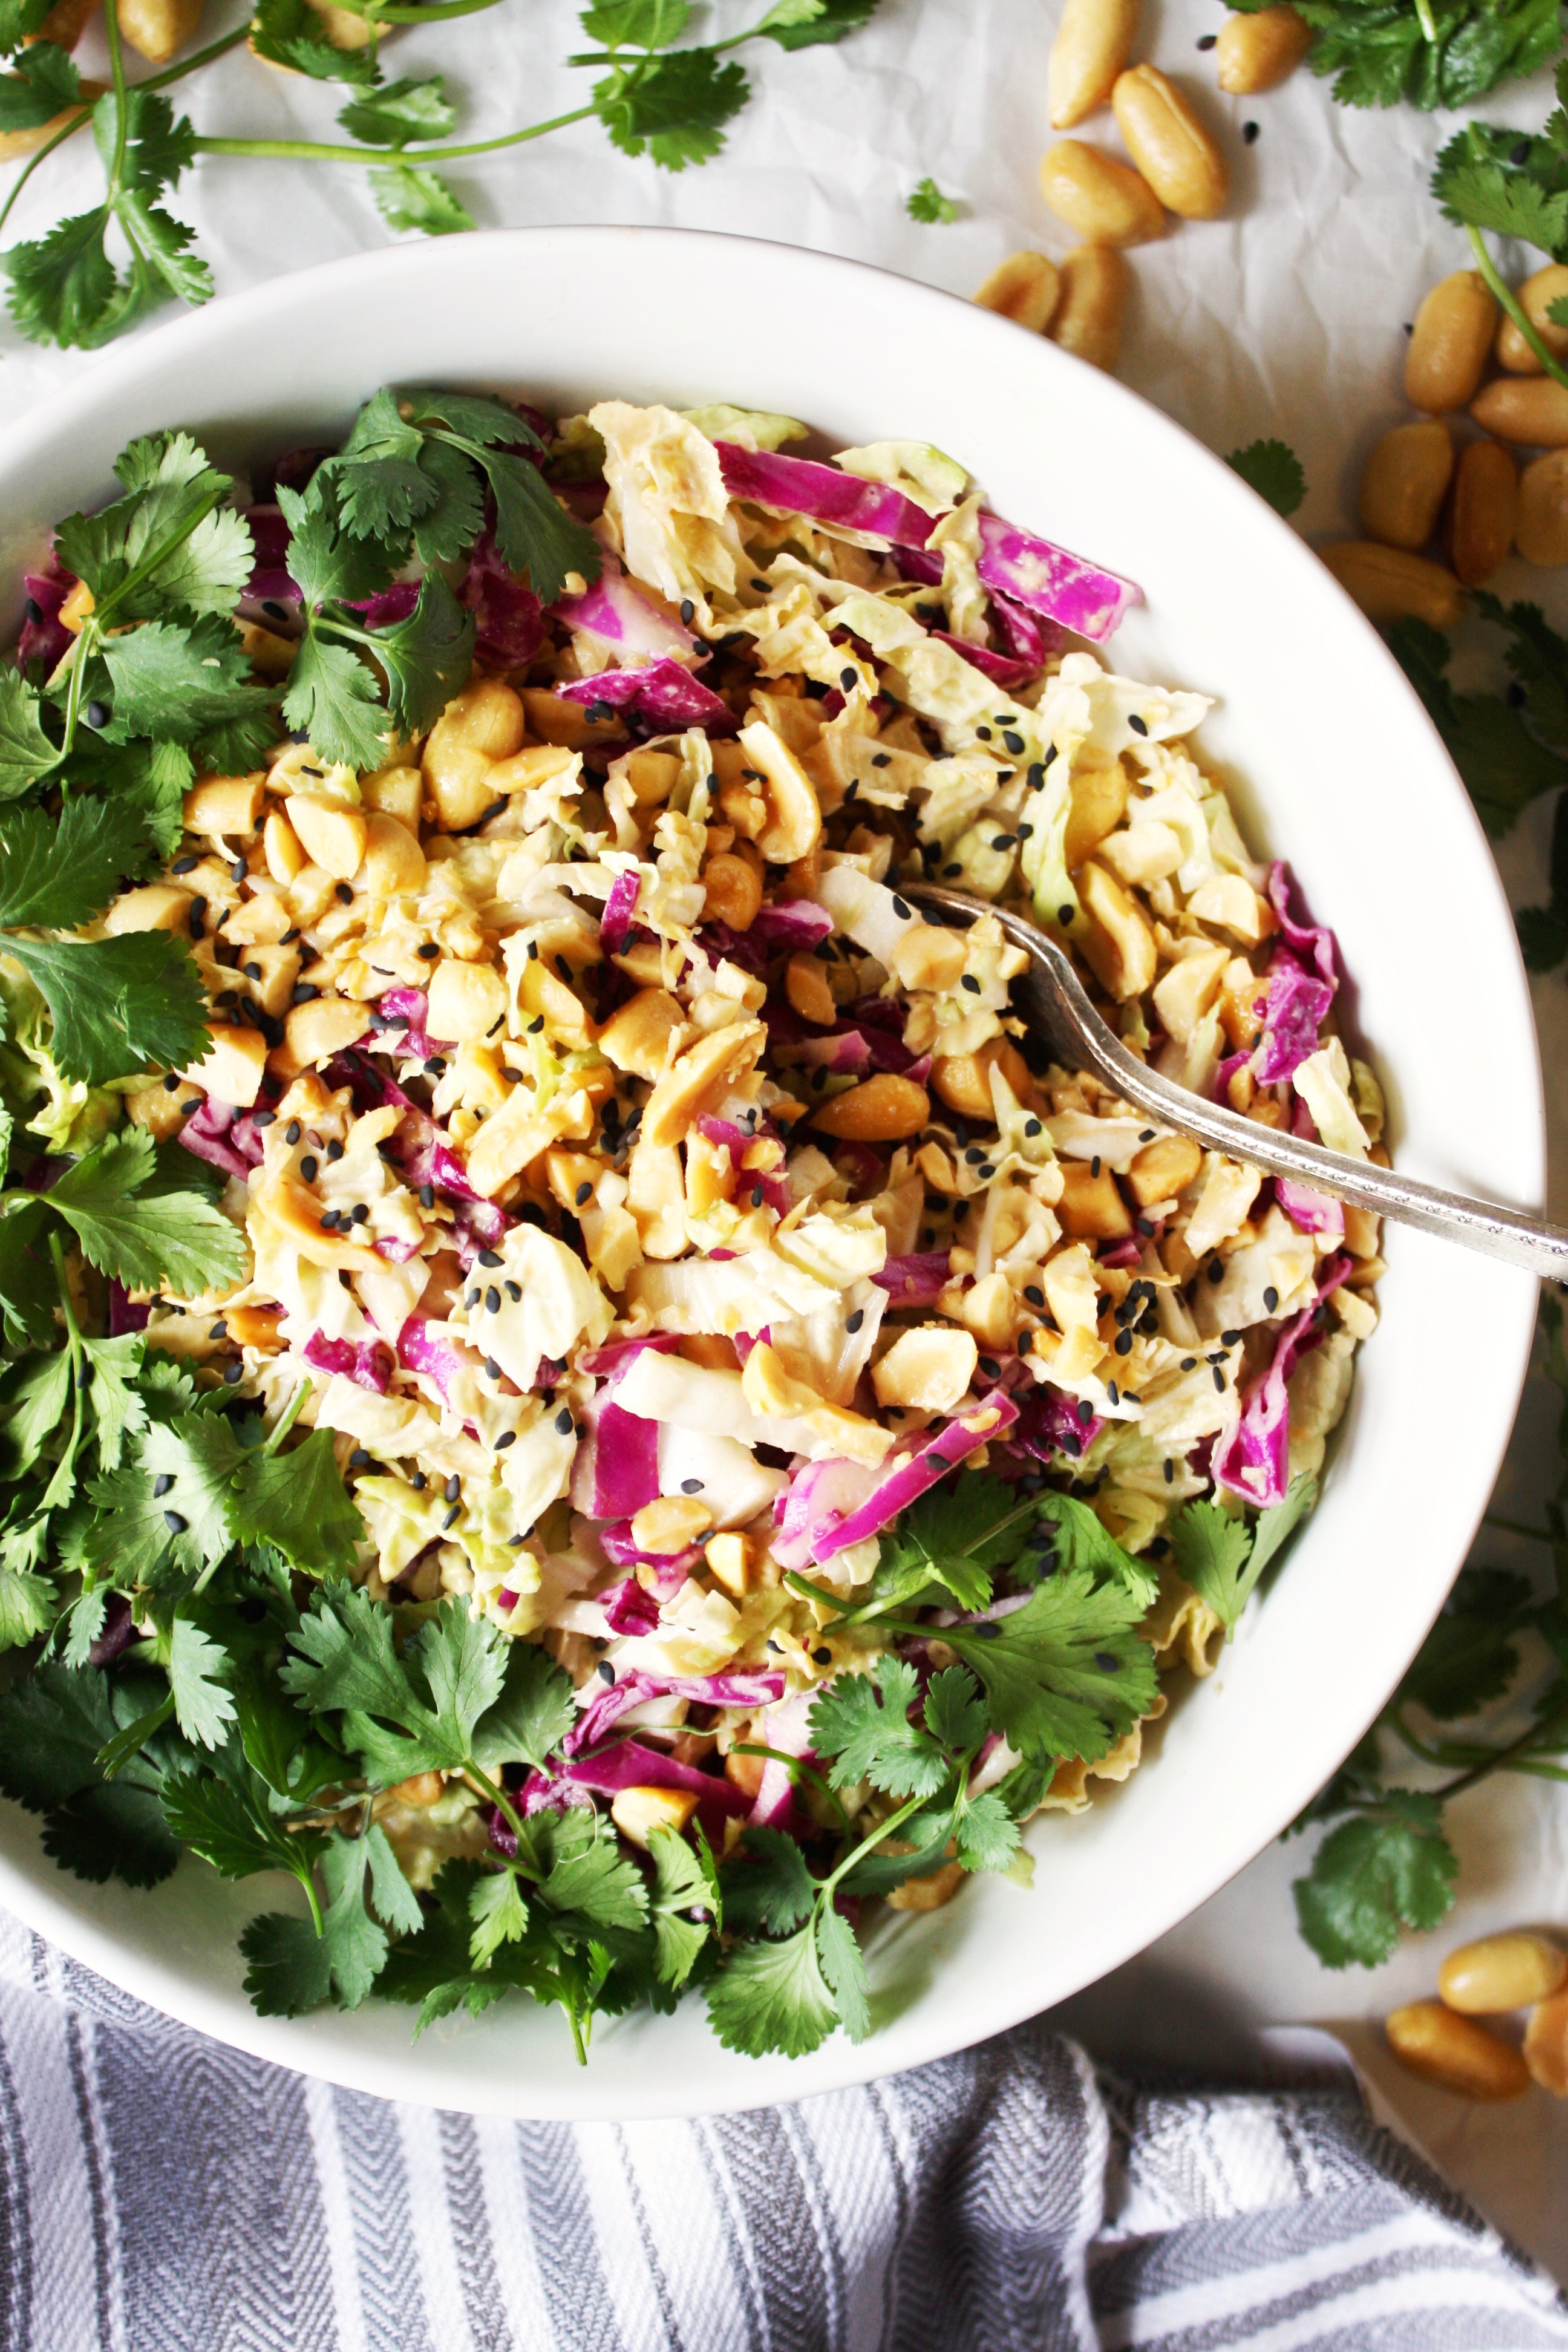 Crunchy Cabbage Salad with Peanut Dressing [21 Day Fix]